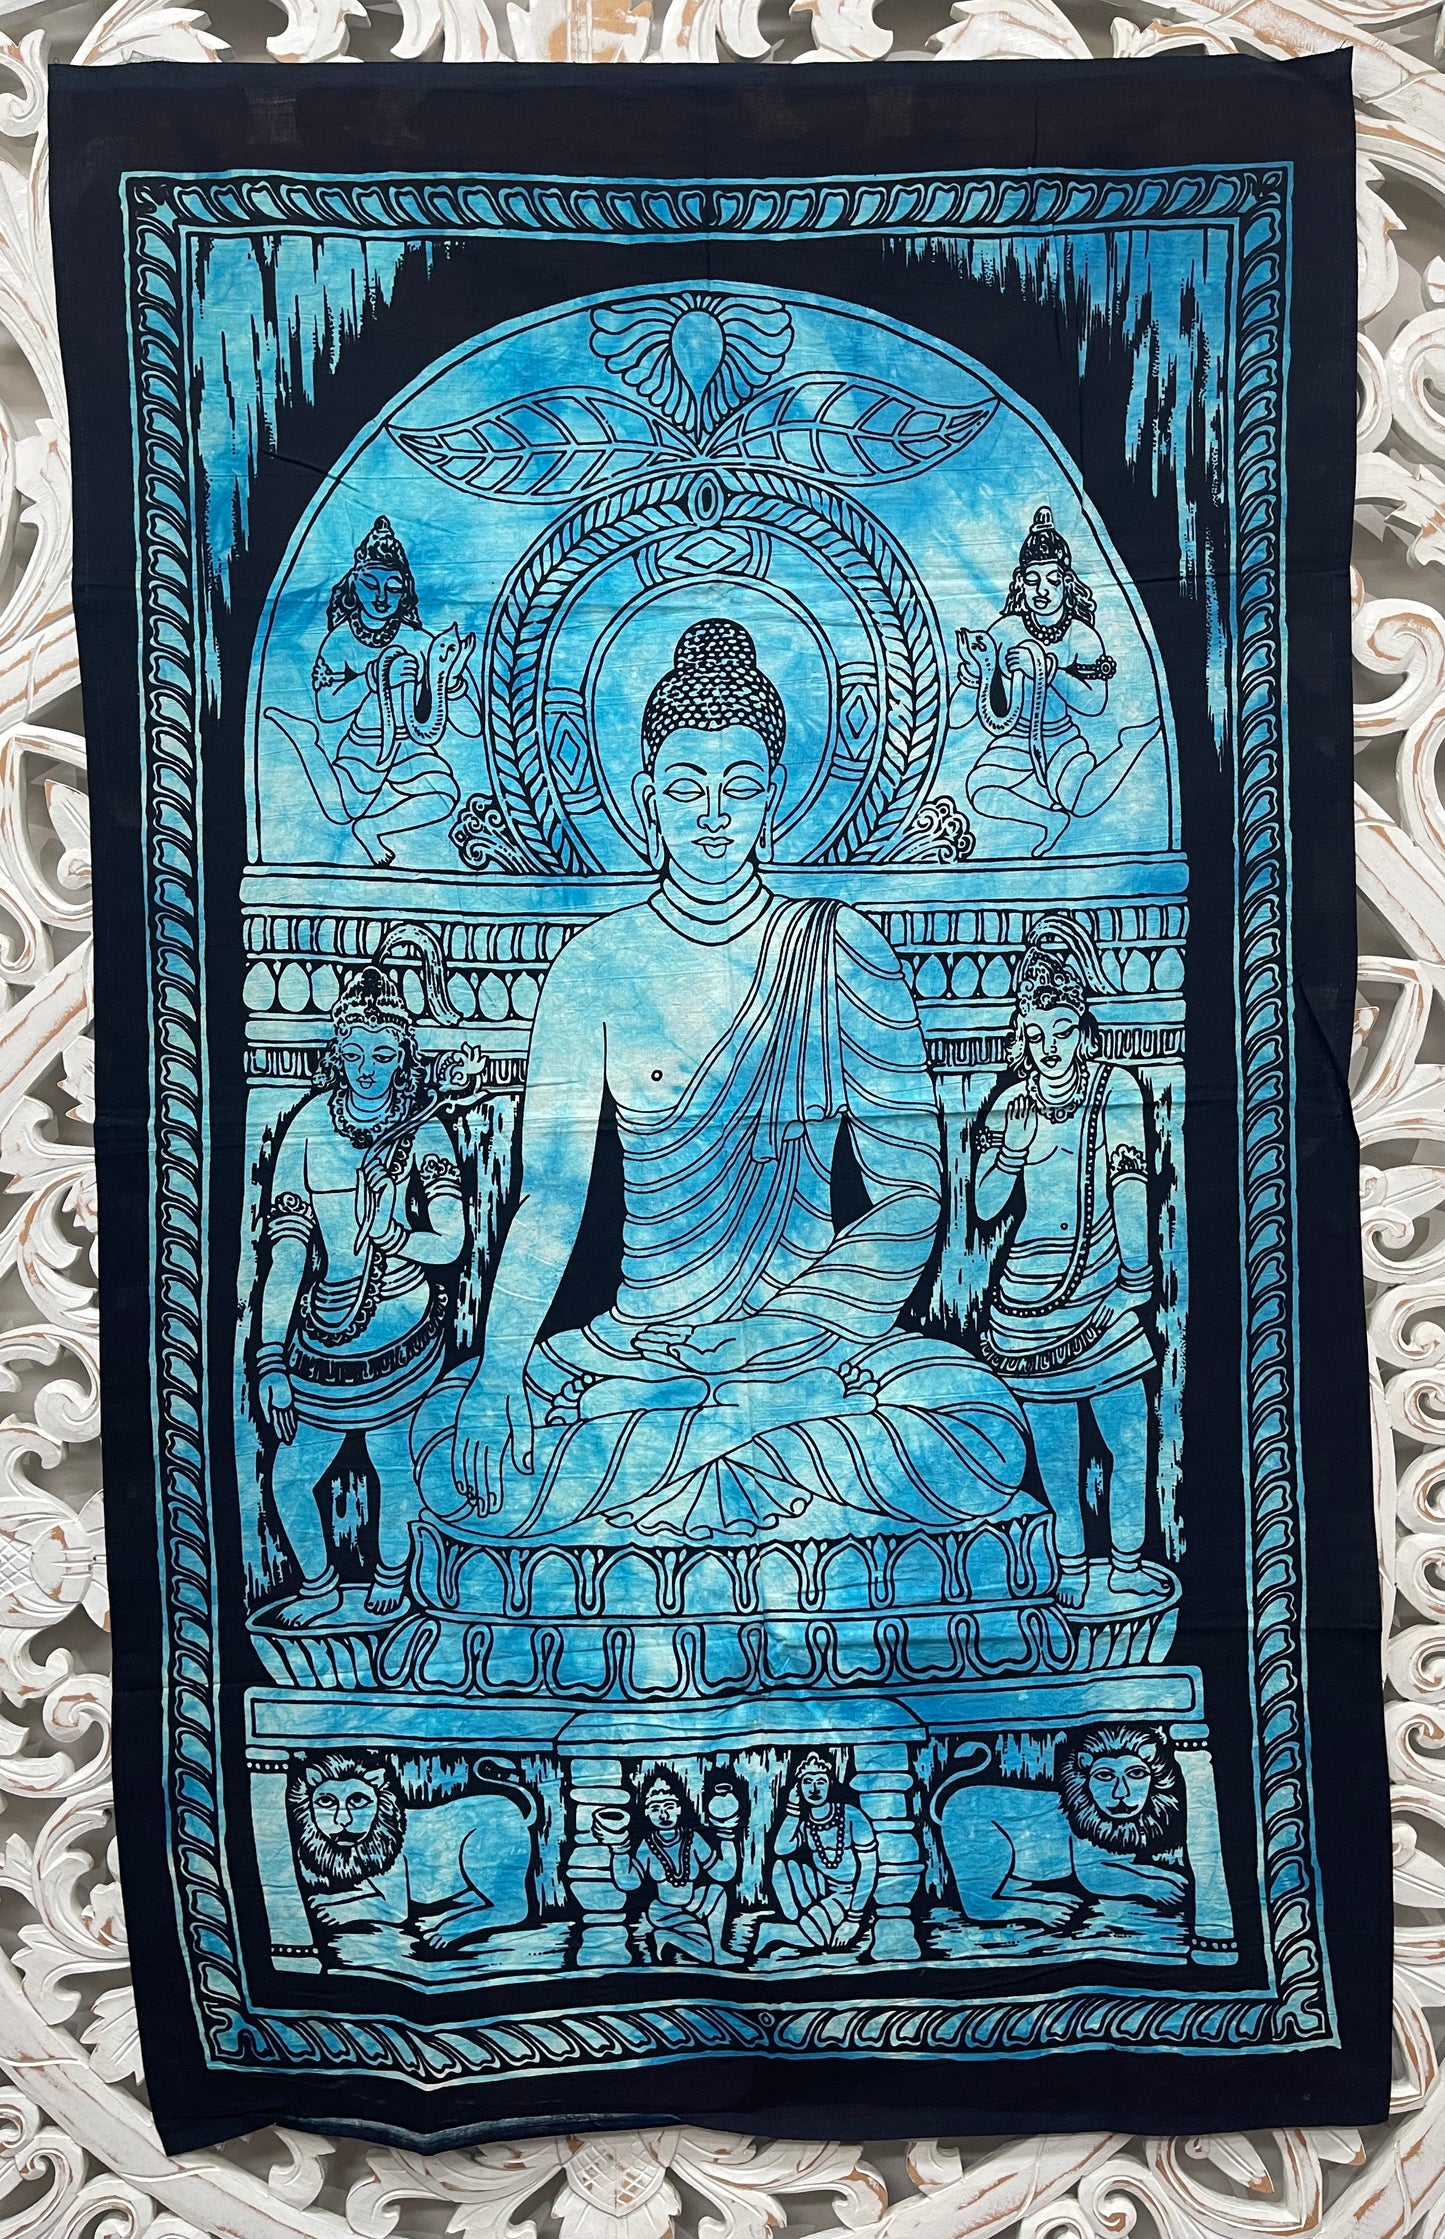 Hand printed Fabric Posters Buddha Tapestry Wall Hanging - Available in 5 Colors